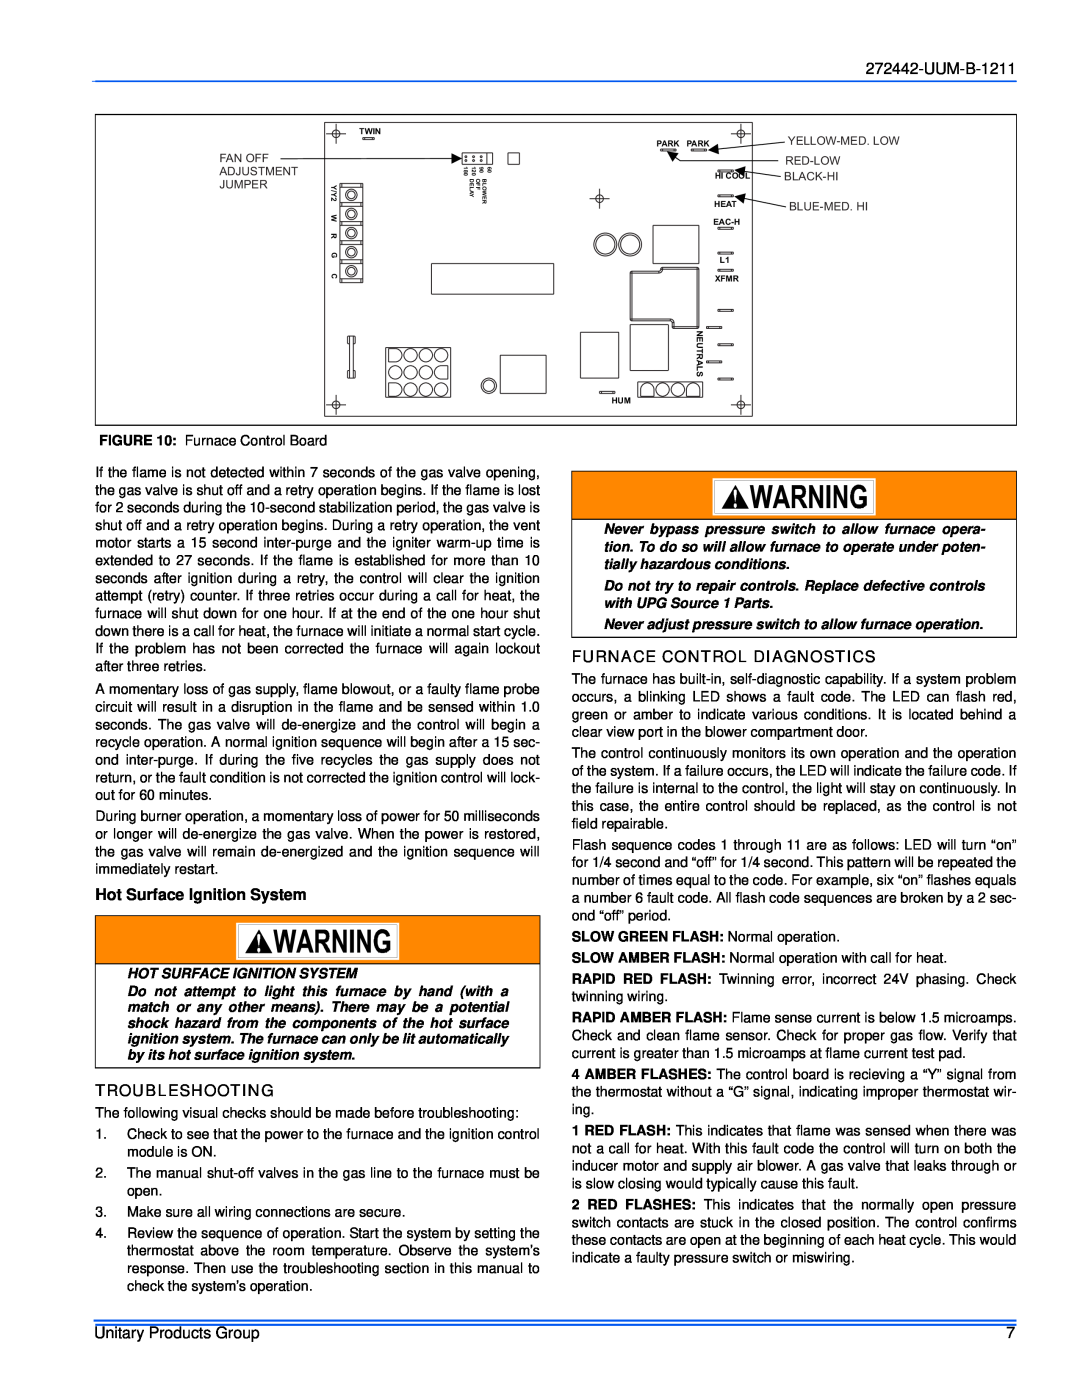 York GY8S160E30UH21 service manual Hot Surface Ignition System, Troubleshooting, Furnace Control Diagnostics, UUM-B-1211 